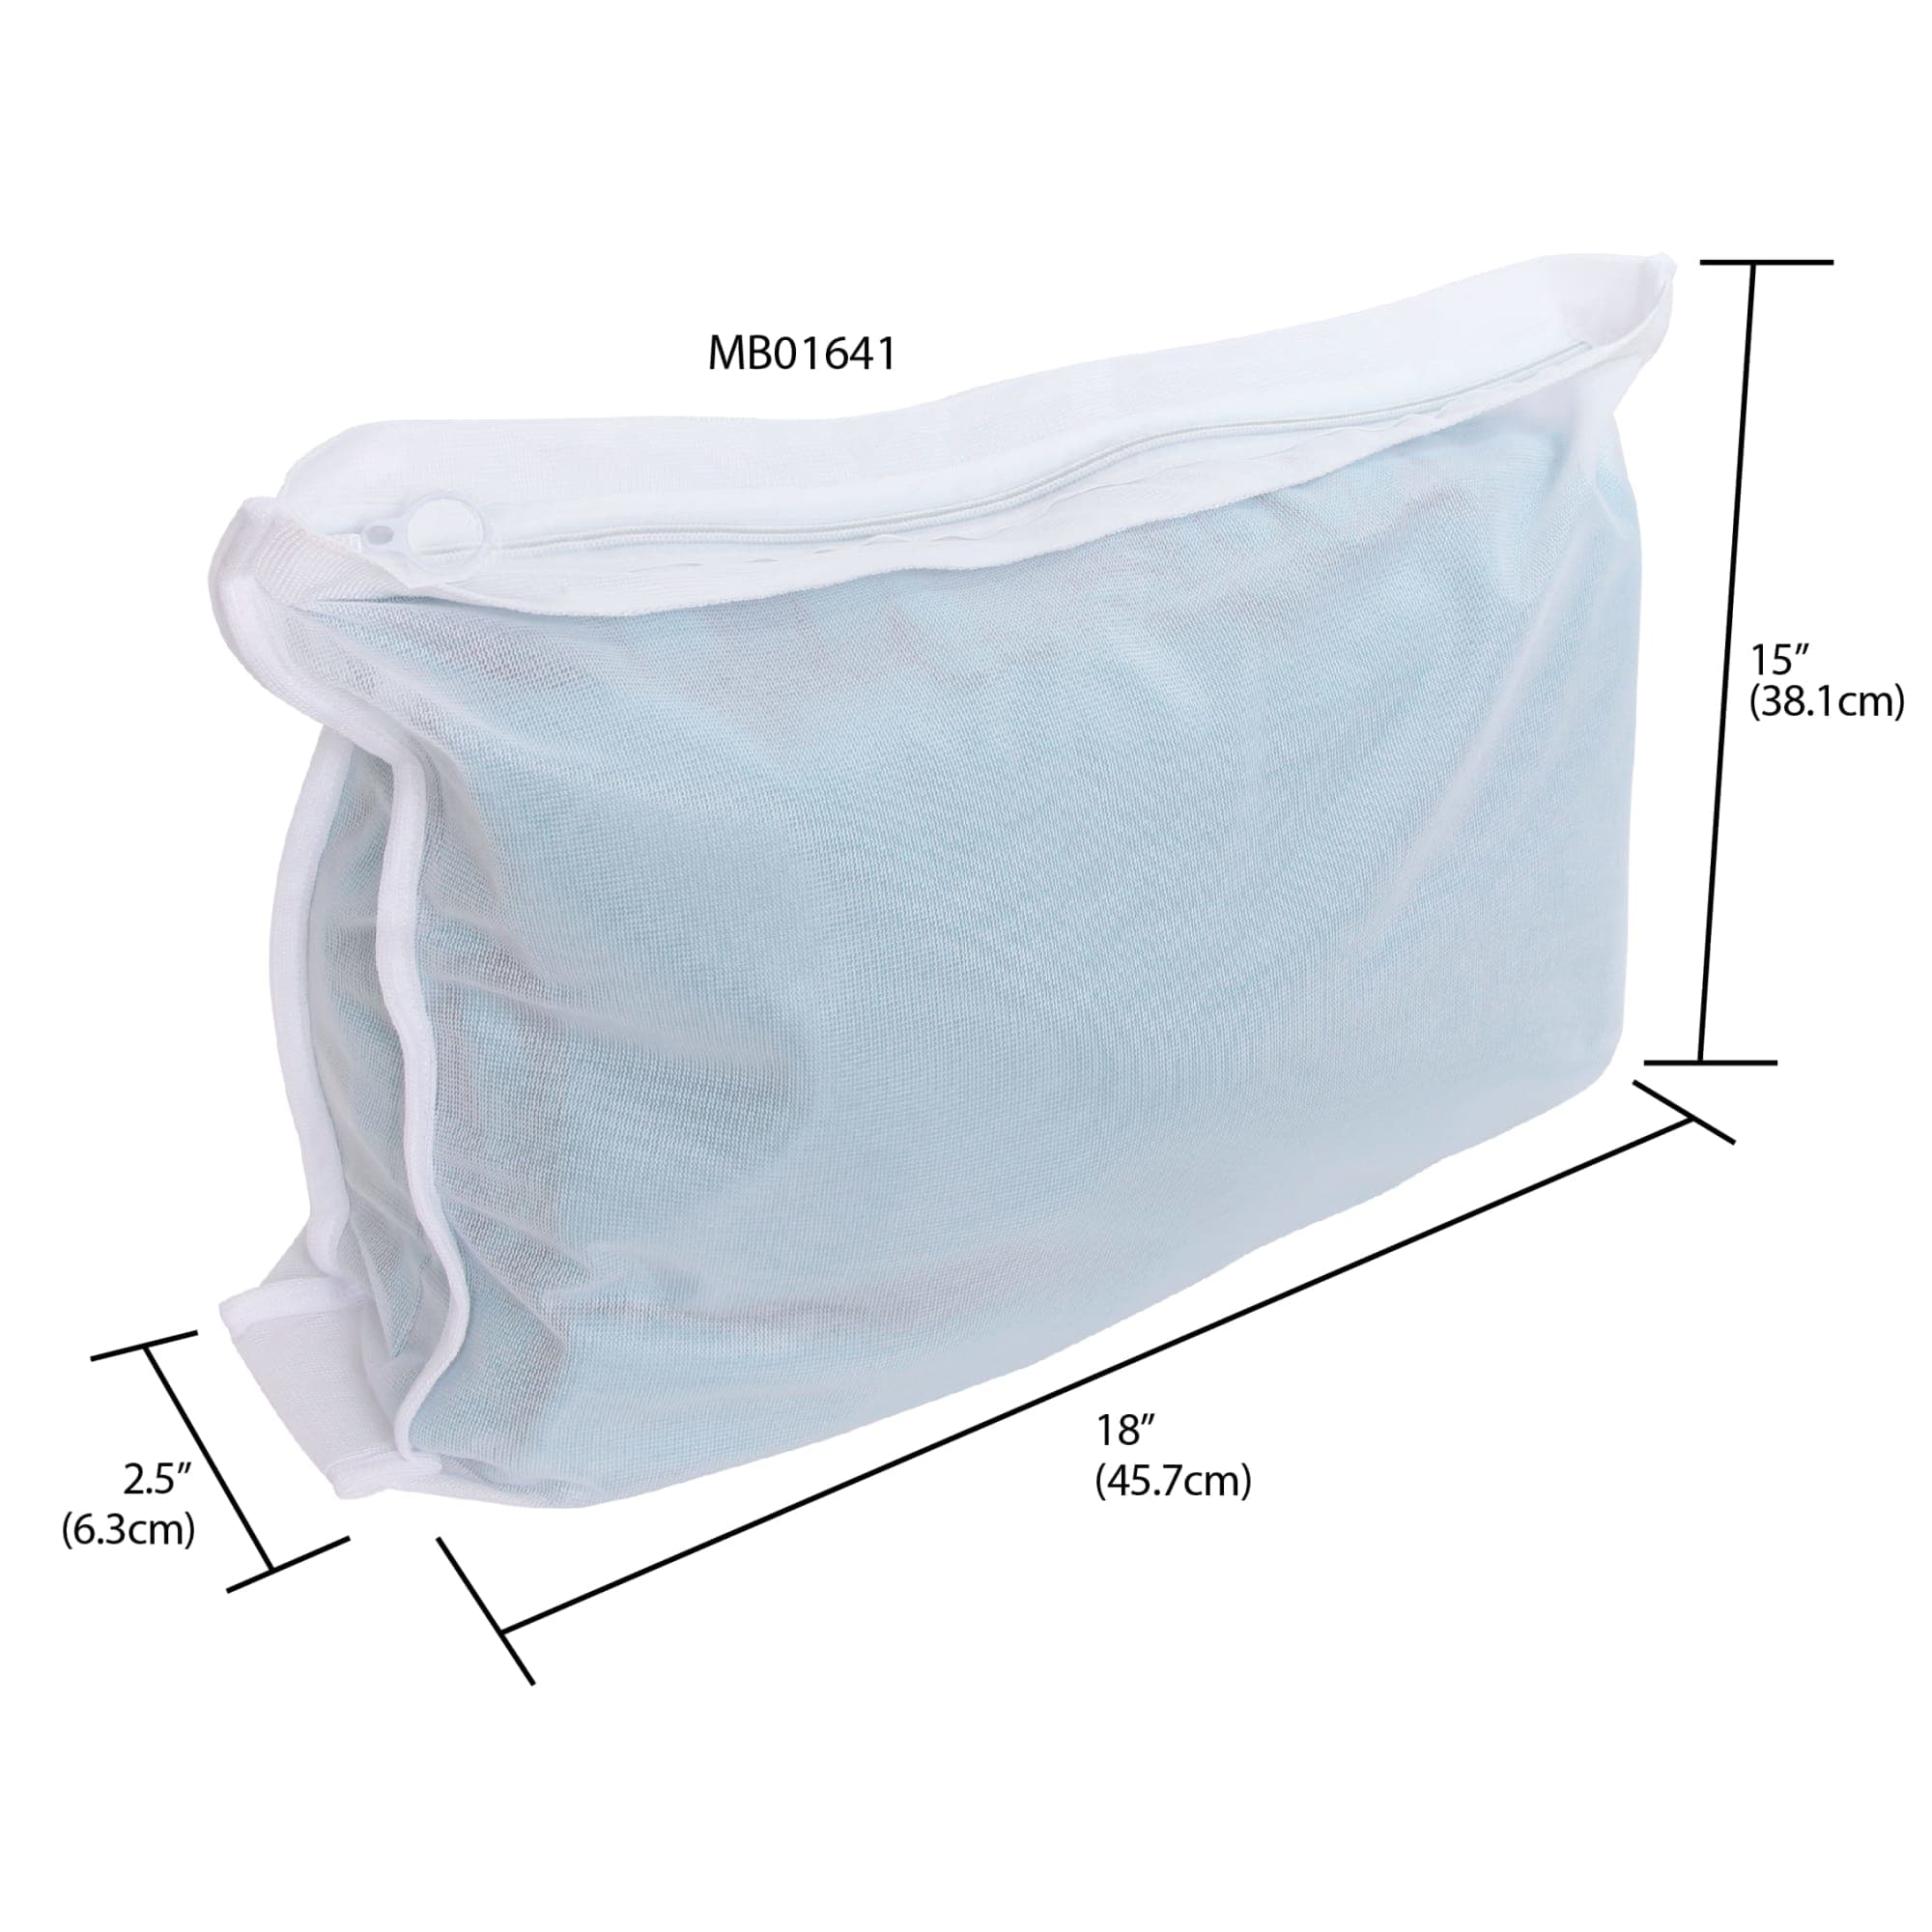 Home Basics Finely Netted Breathable Micro Mesh Intimates Square Laundry Wash Bag with Rust-Proof Zipper Closure, White $3.00 EACH, CASE PACK OF 24